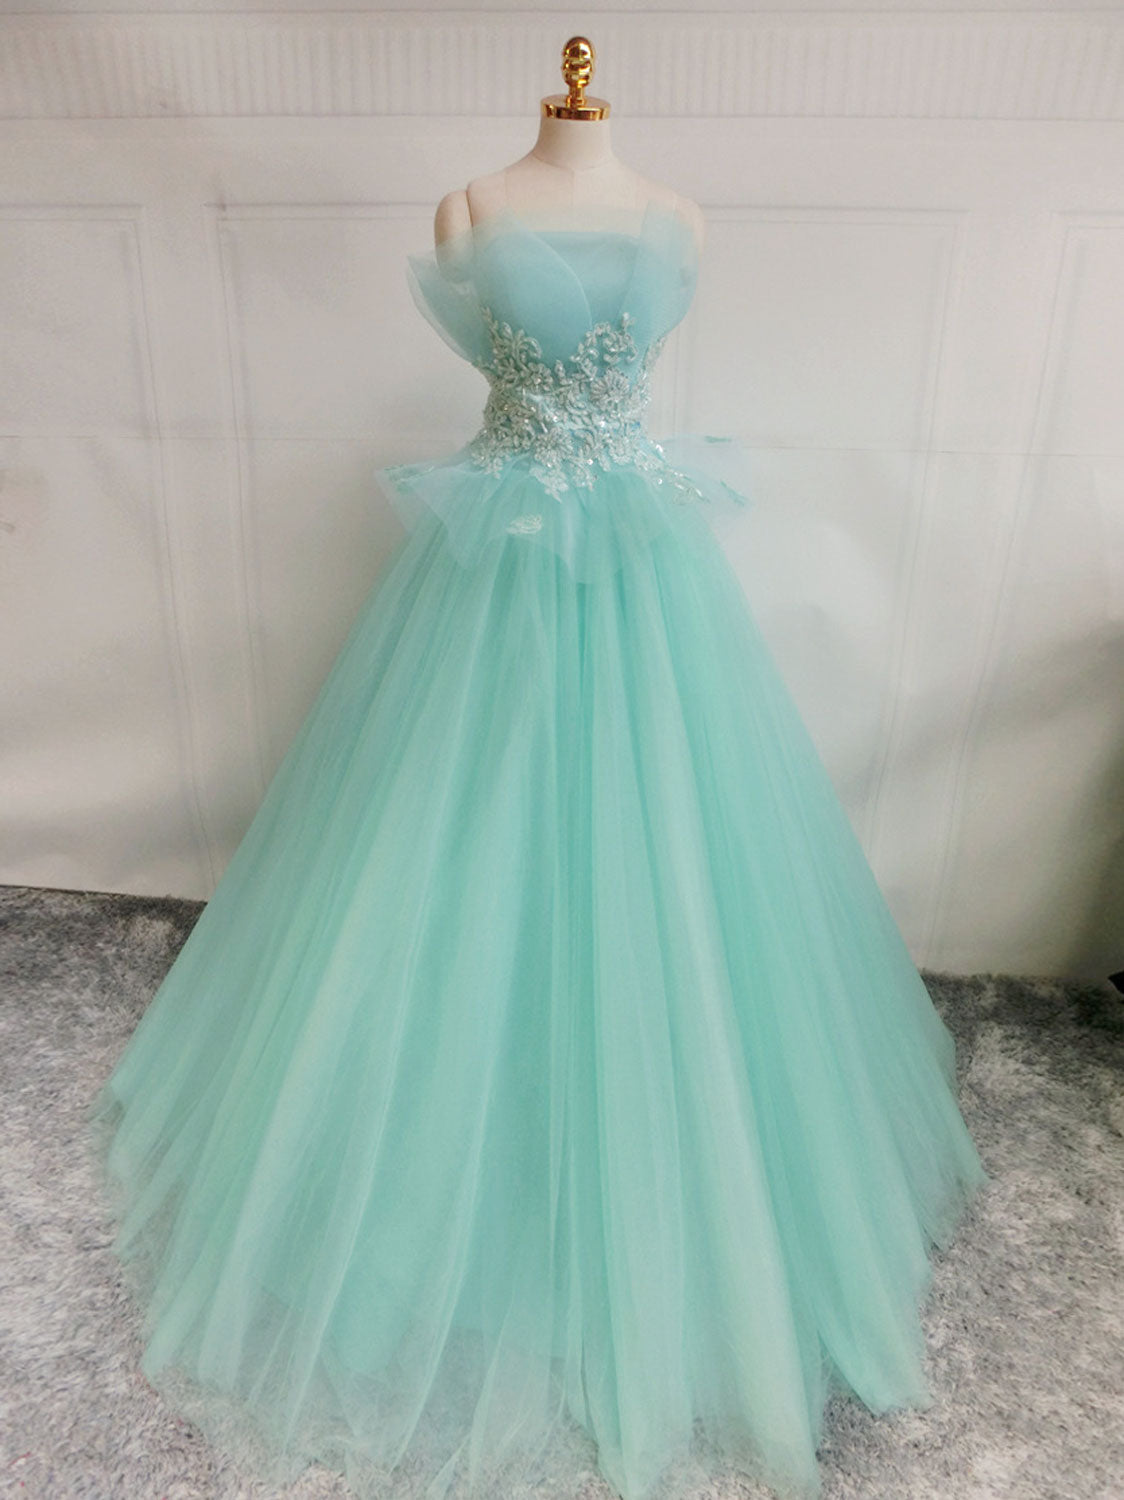 Fairytale Strapless Mint Green Tull Ball Gown Prom Dress - DollyGown